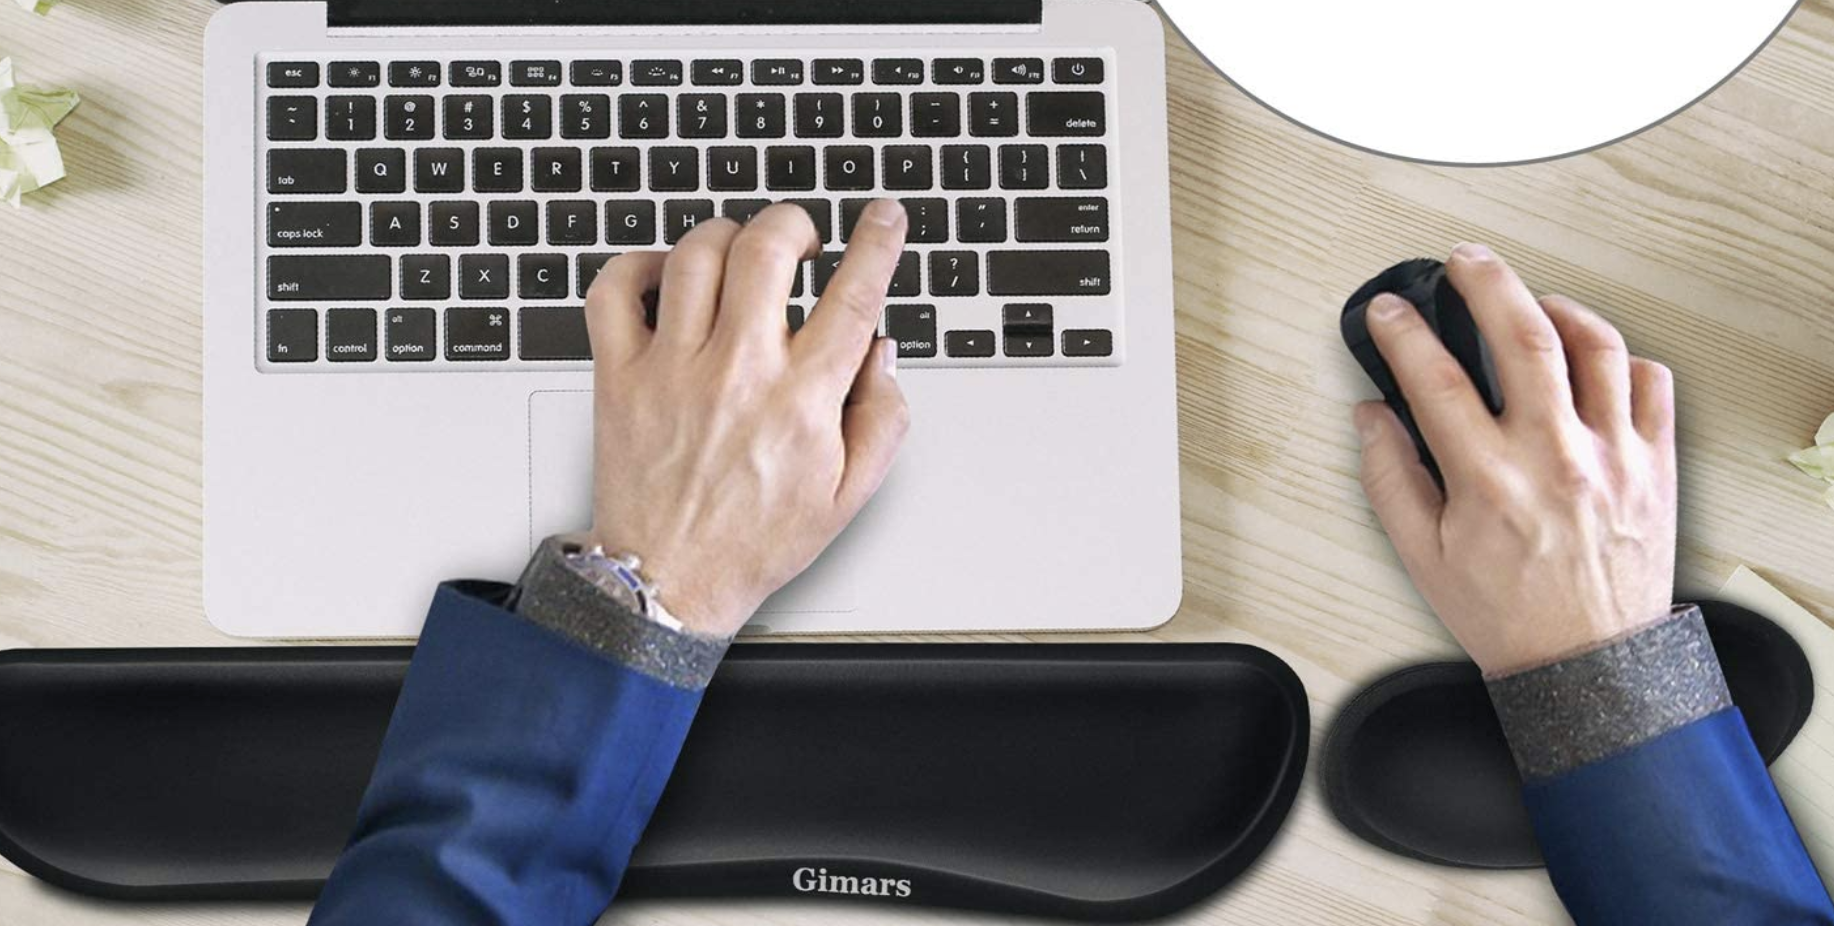 A model typing with one hand and using a mouse with the other, their wrists propped up by the pads